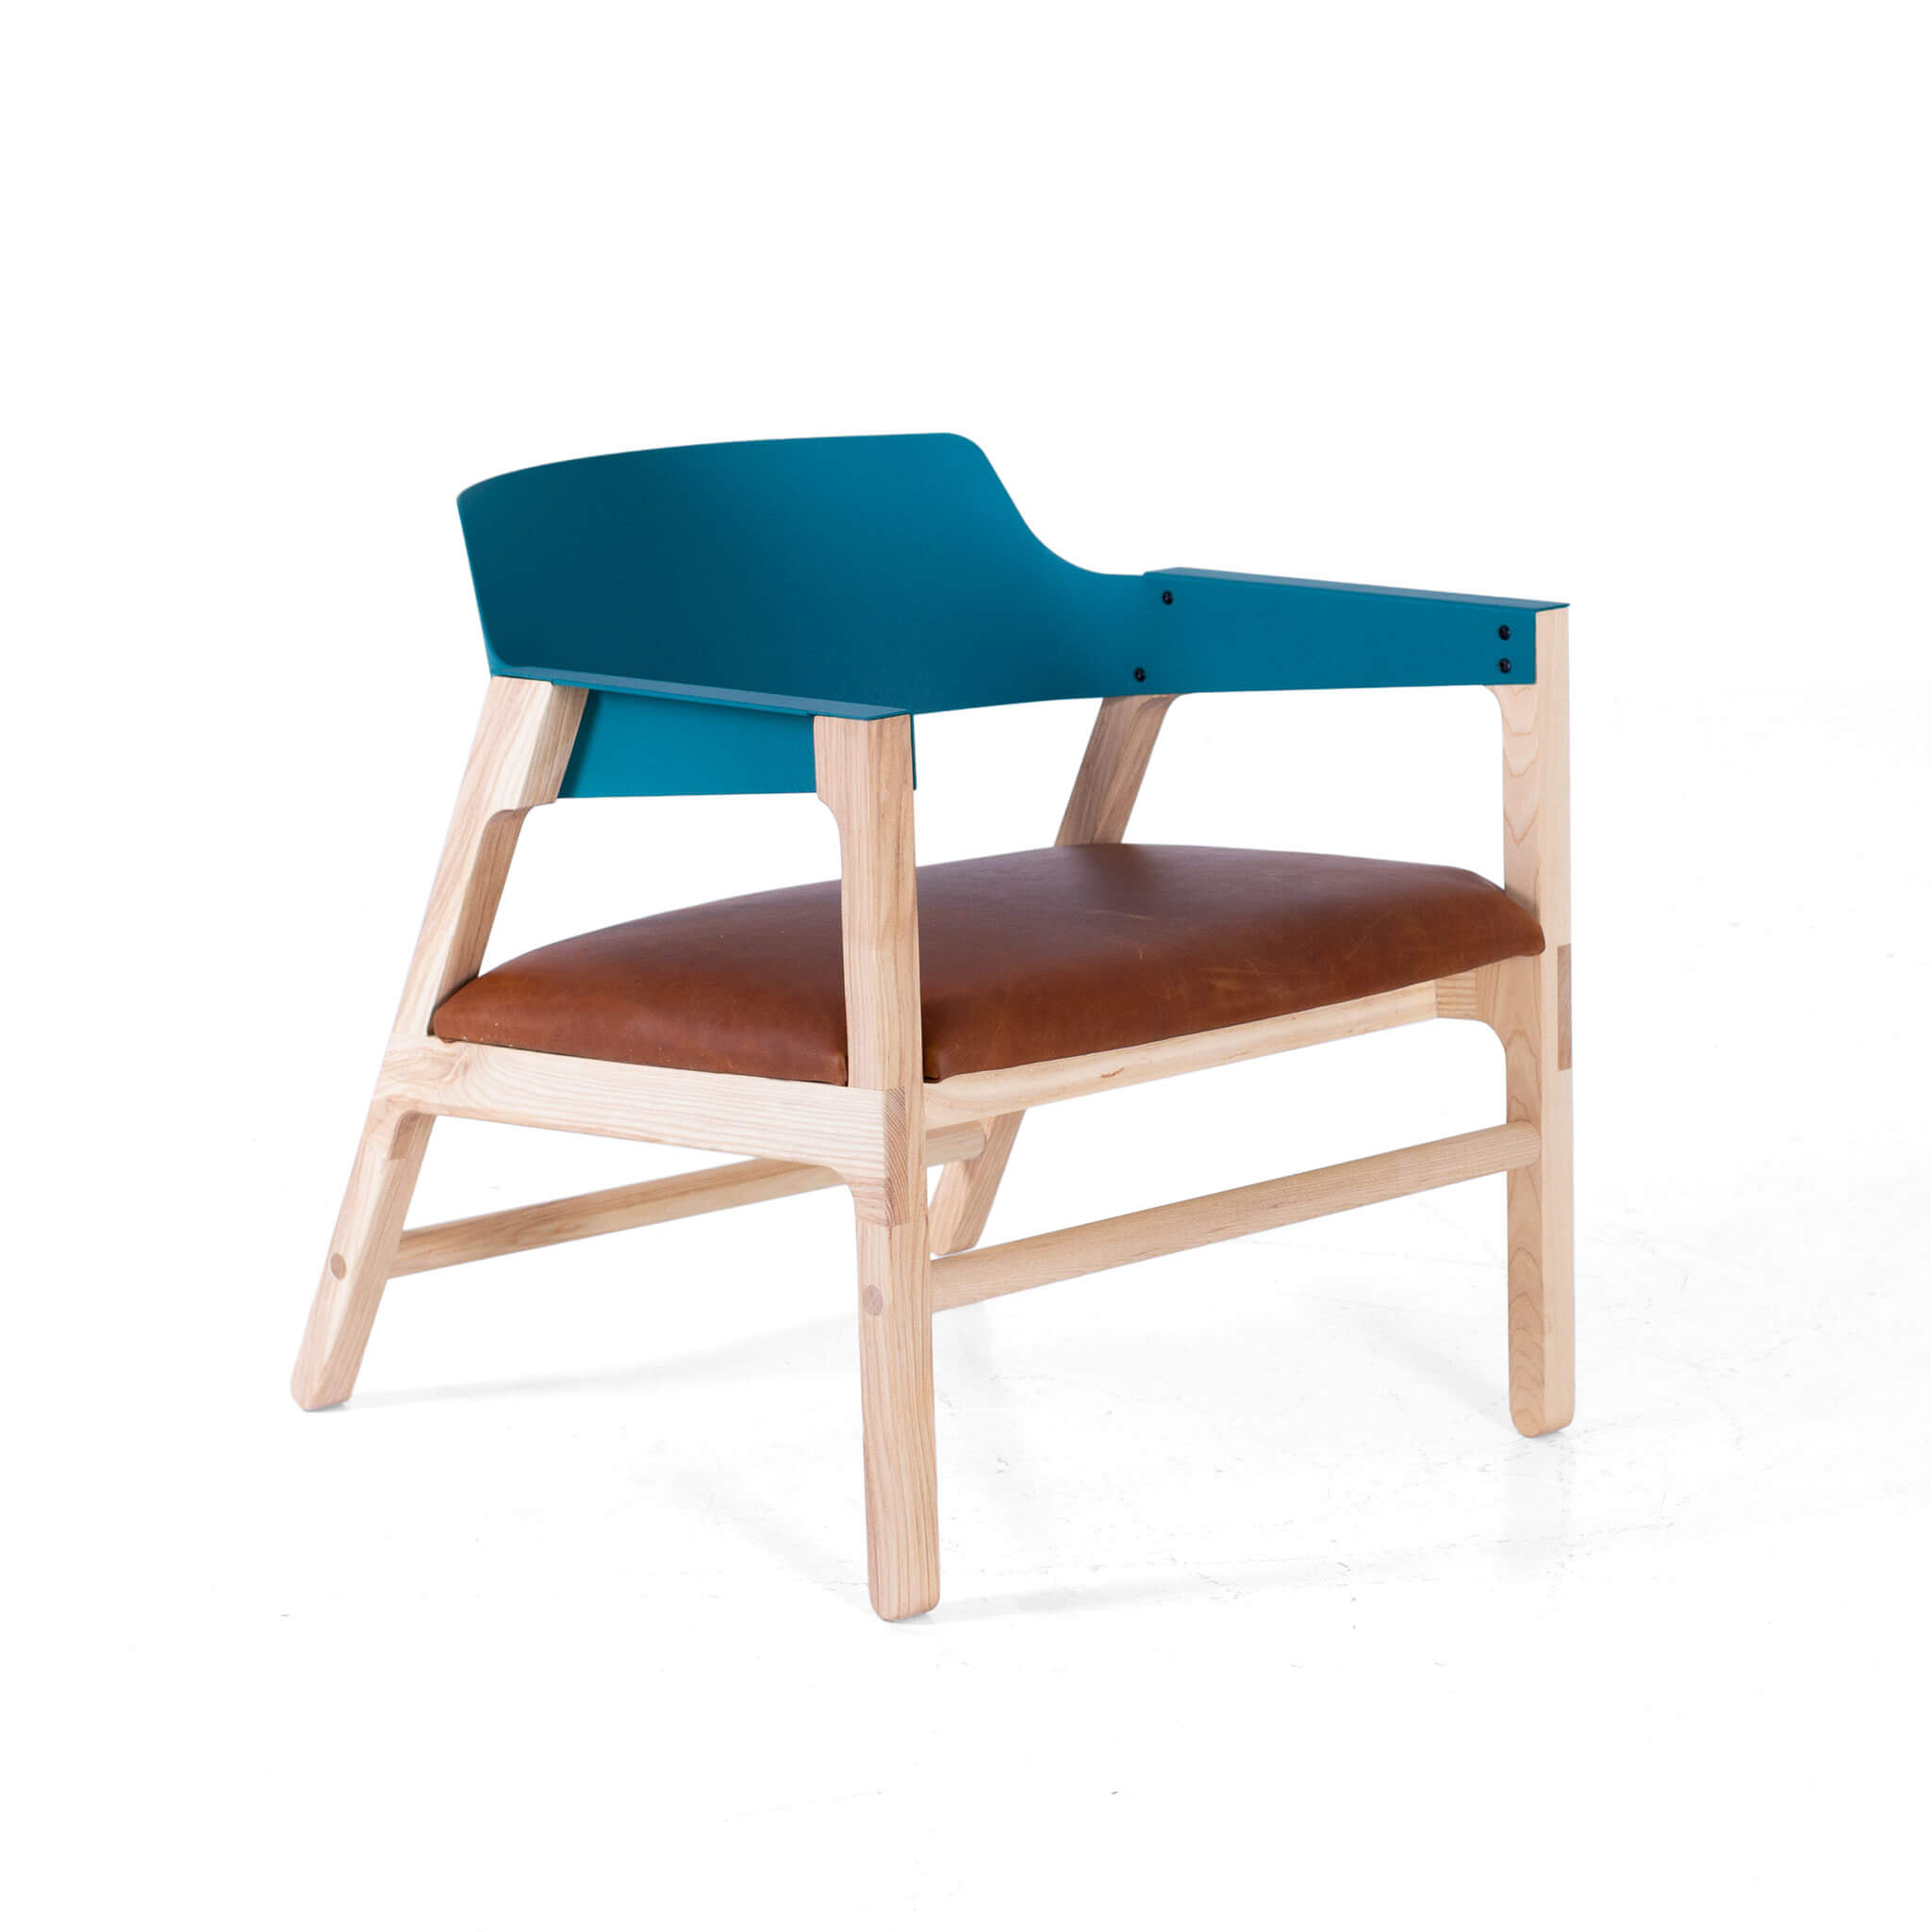 Dokter and Misses - Seating Loop Lounger Teal